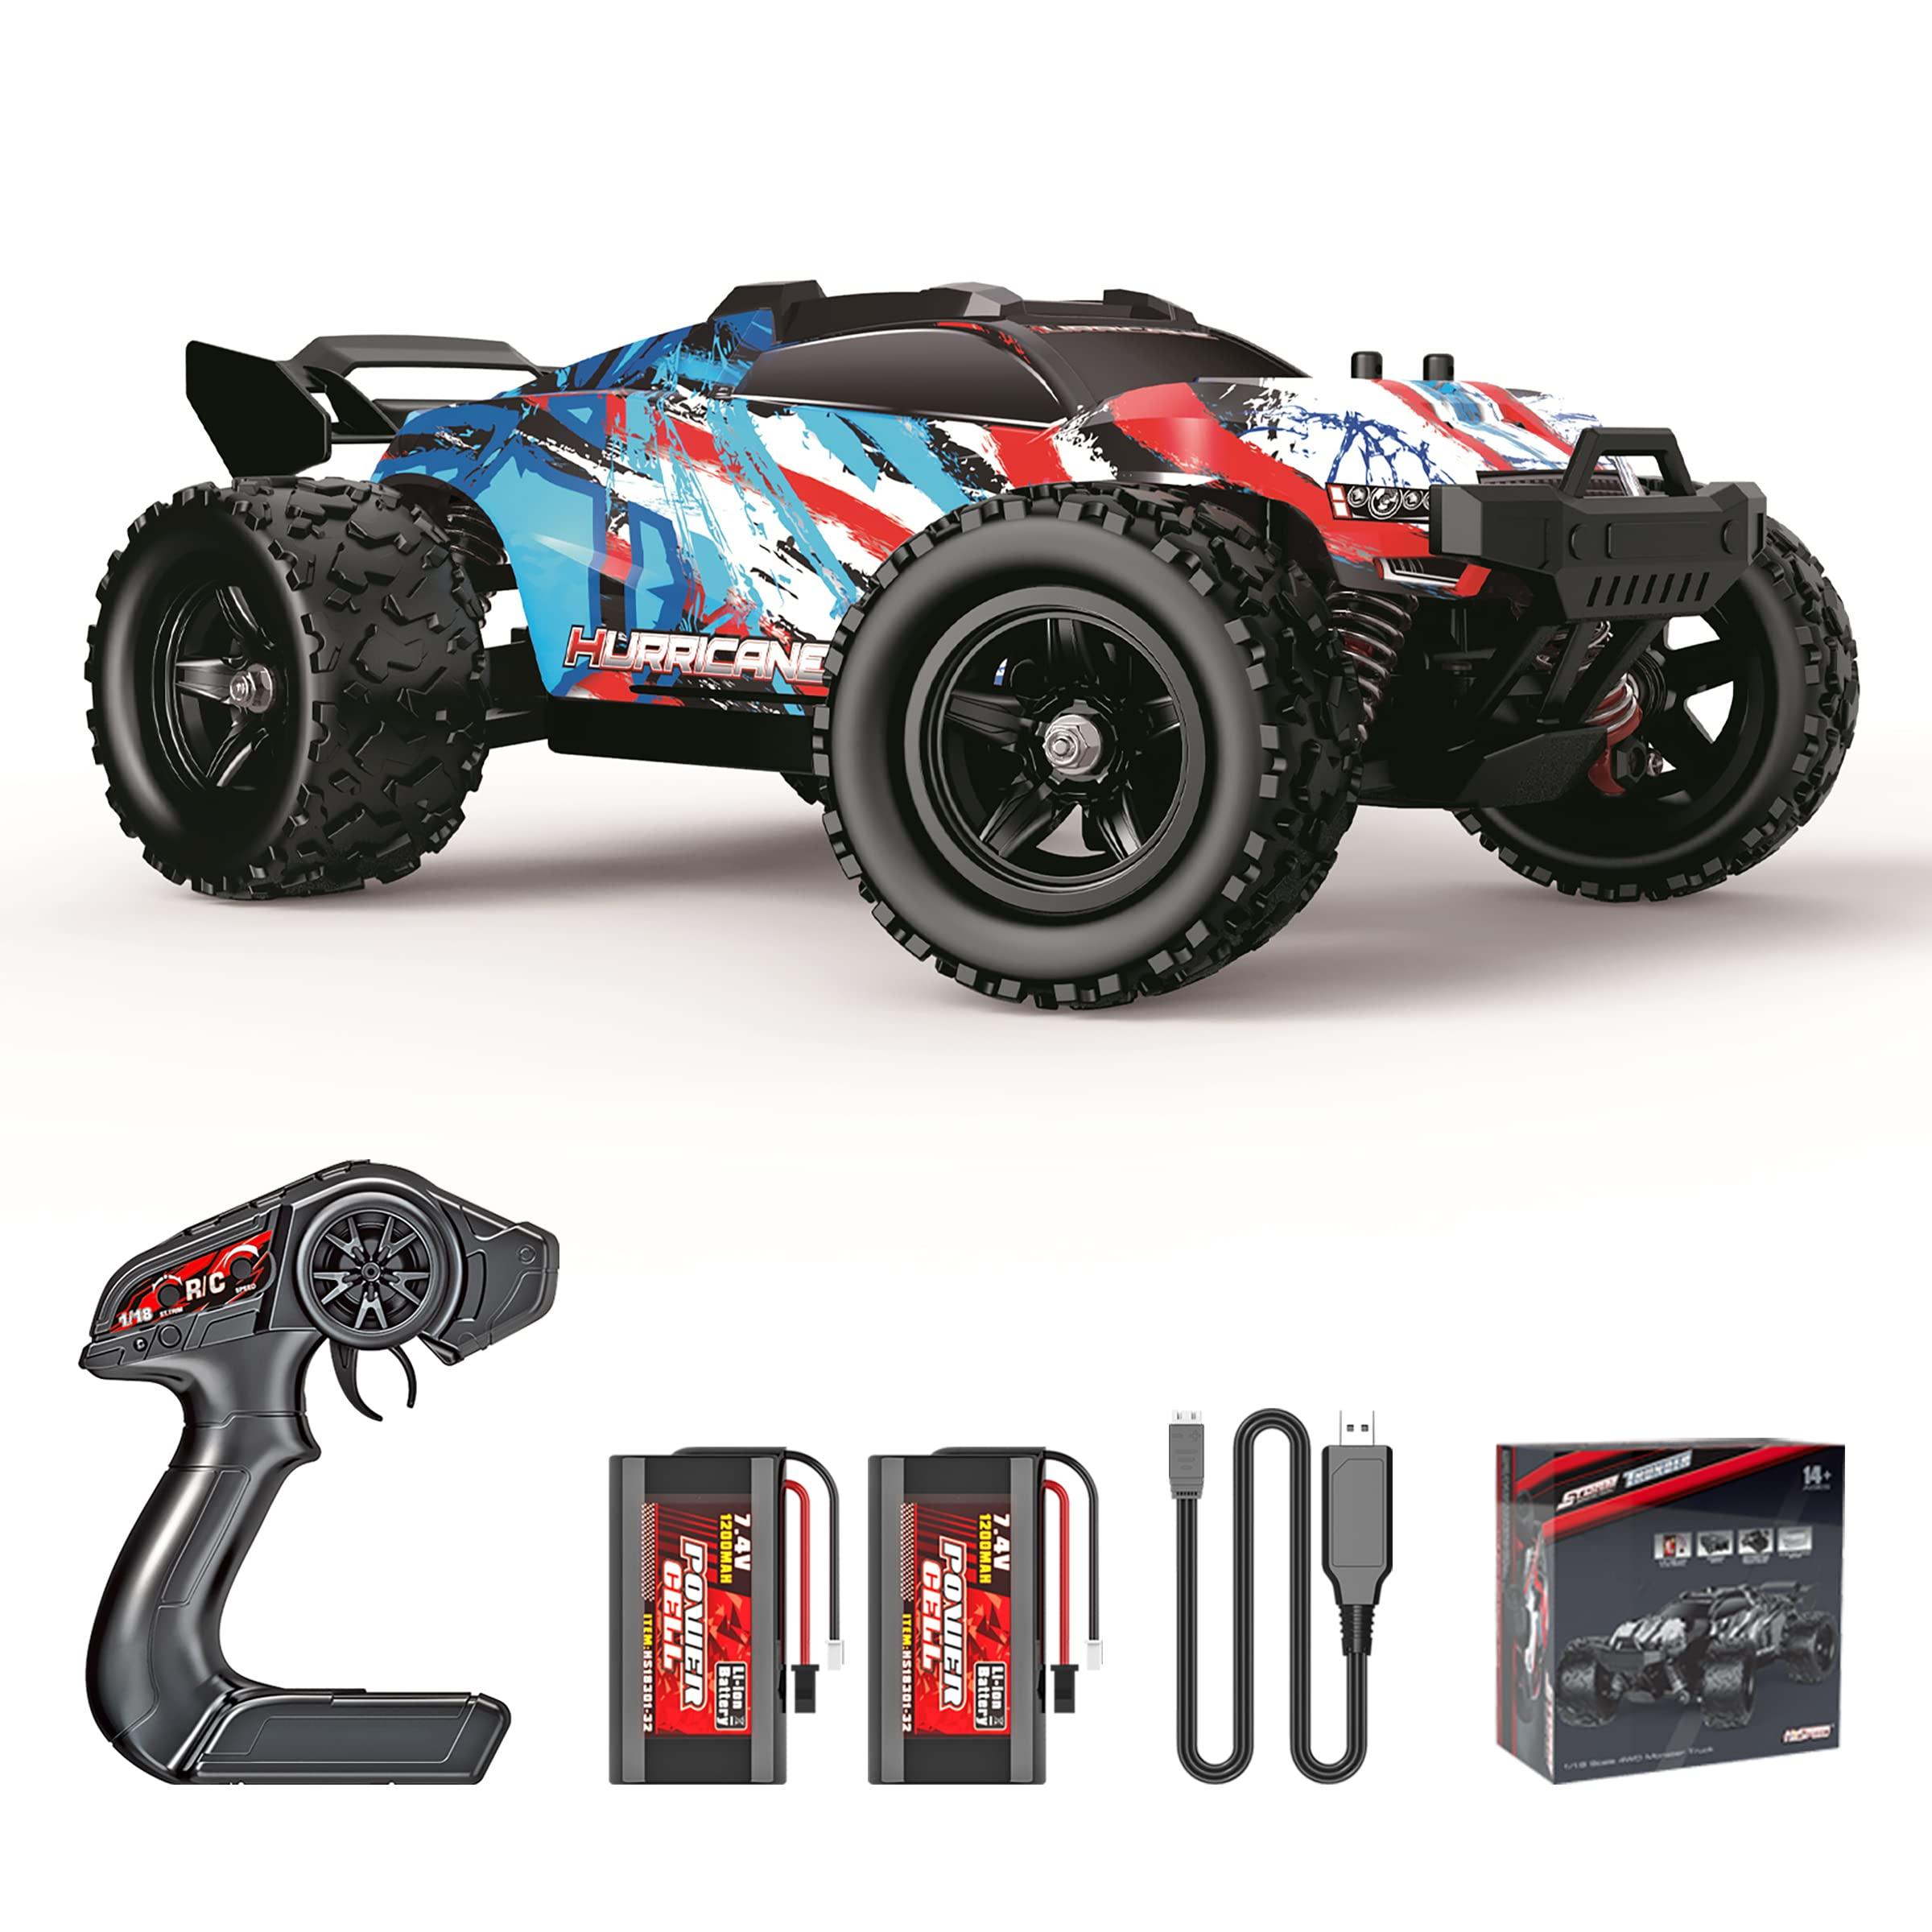 First Remote Control Car: Evolution of Remote Control Cars: From Proportional Control to Customization and Power